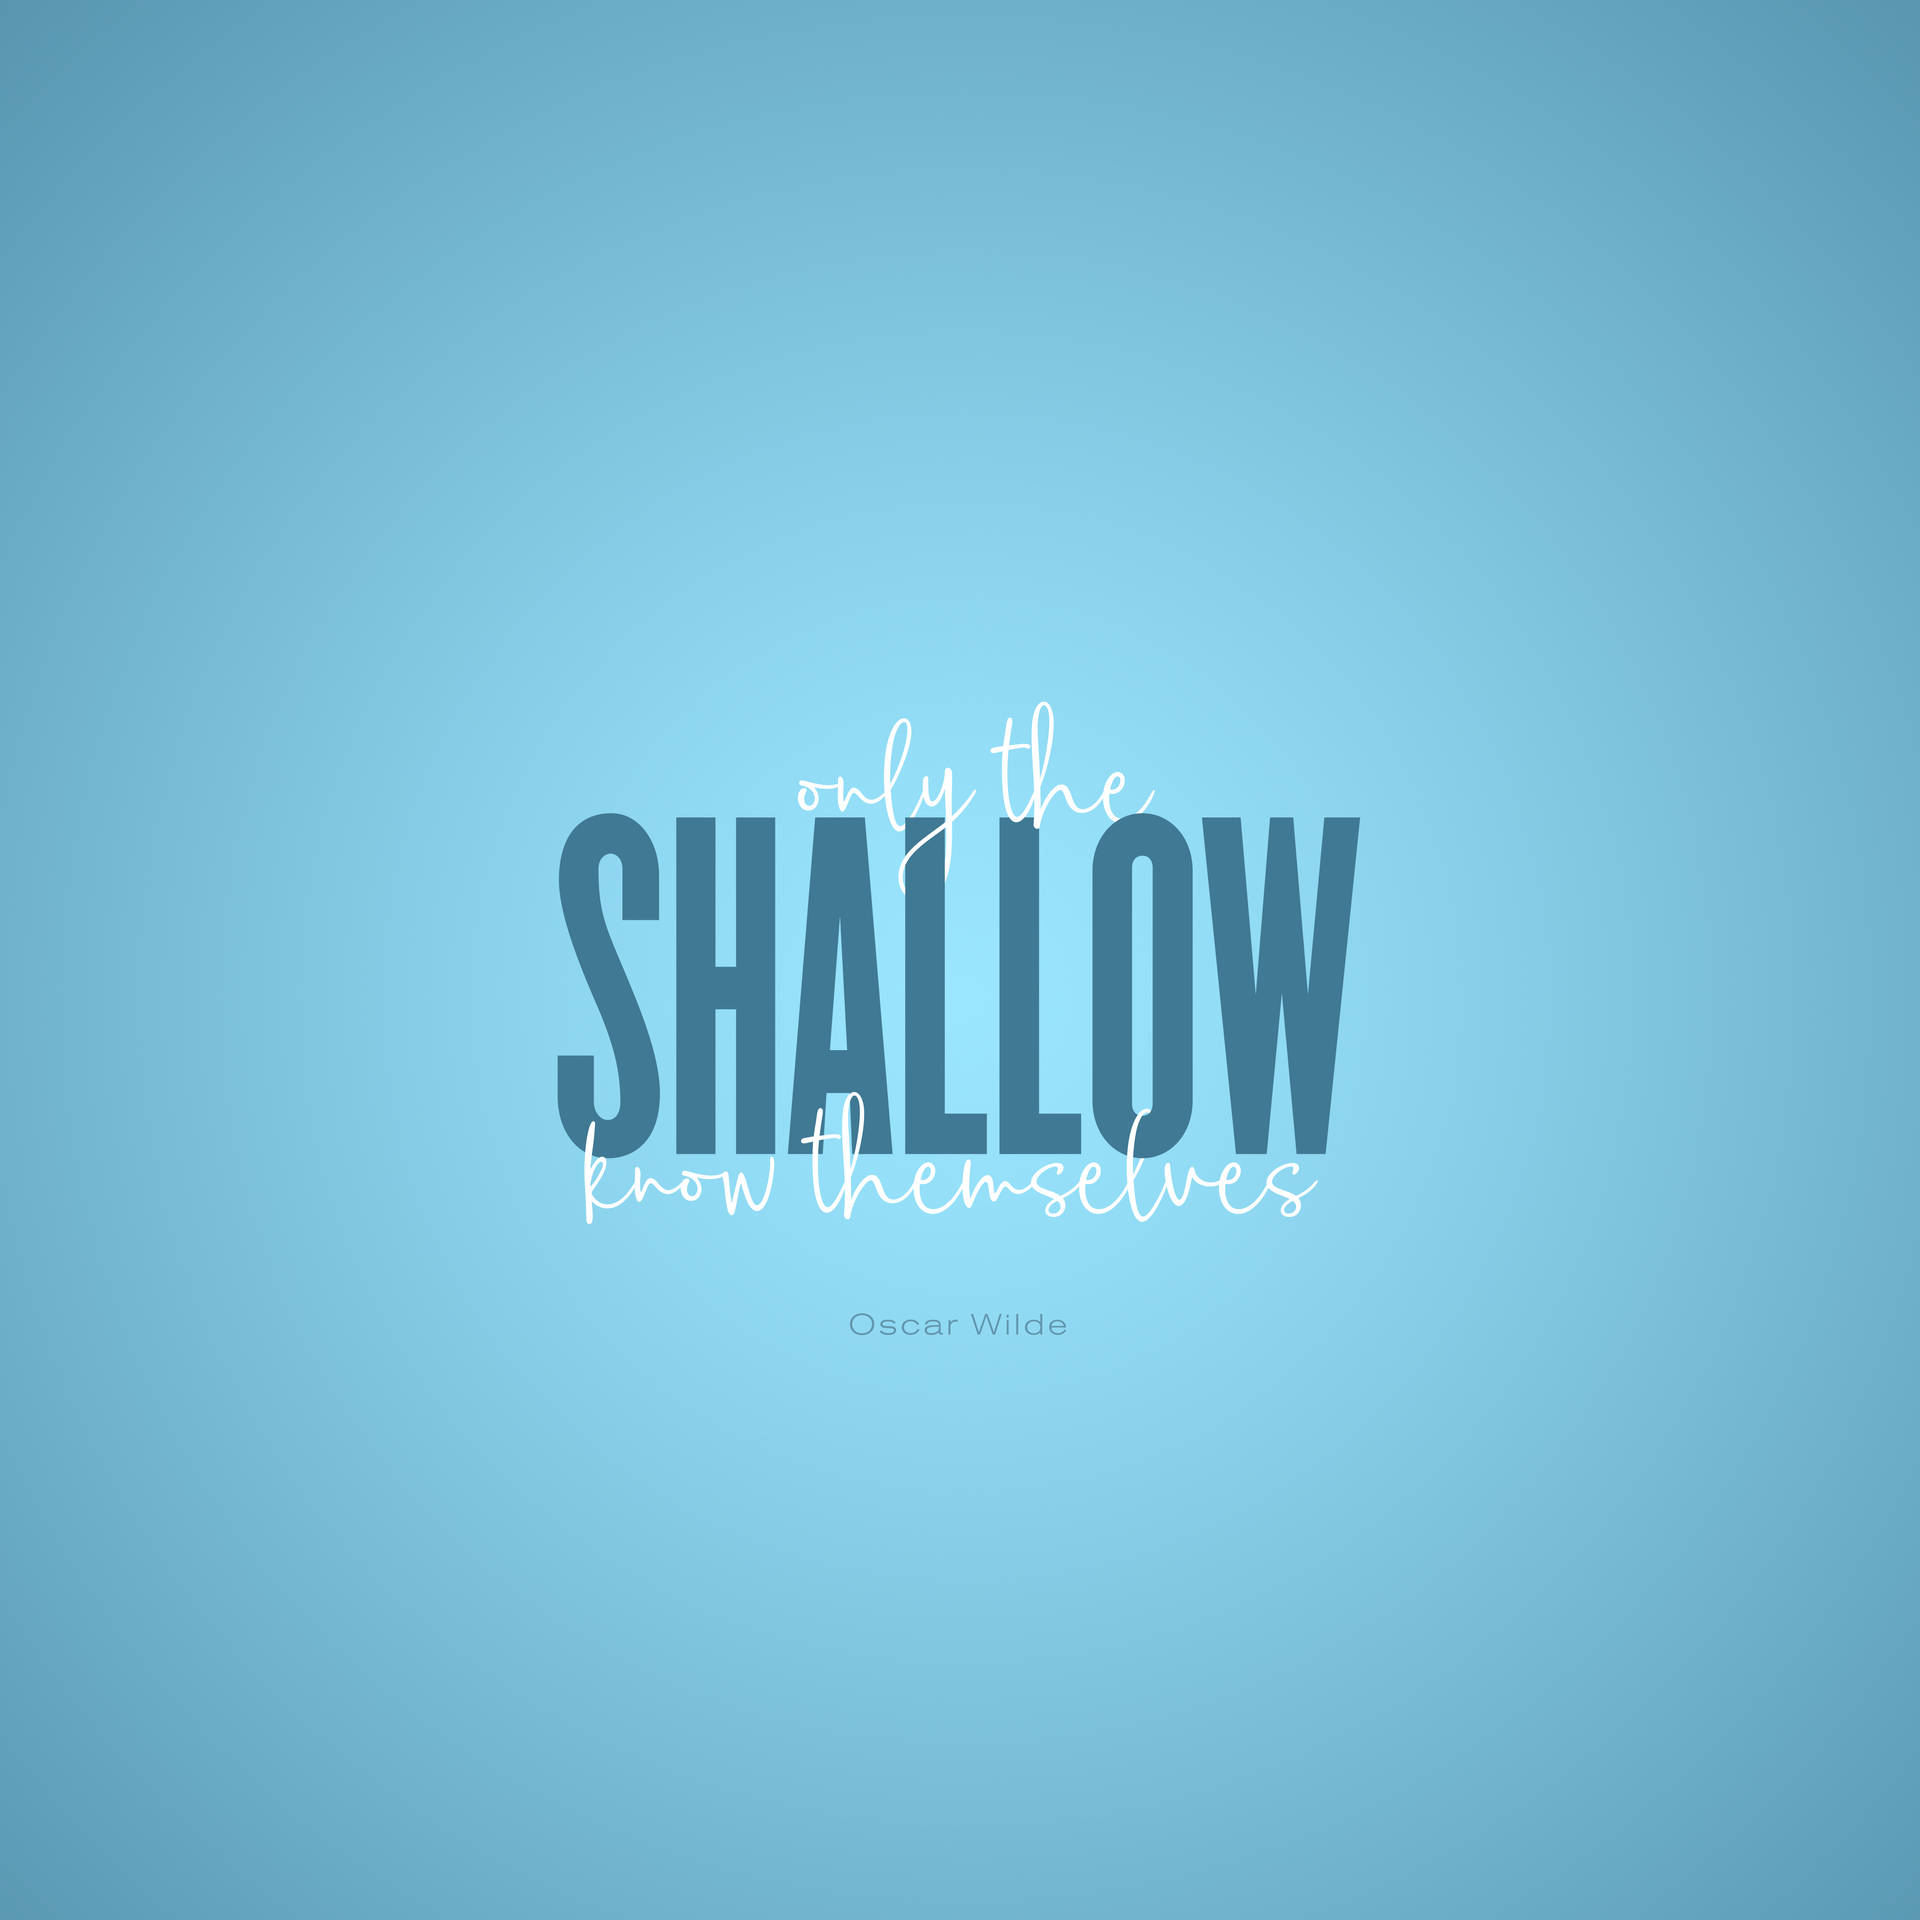 "Shallow words can reach the soul." Wallpaper